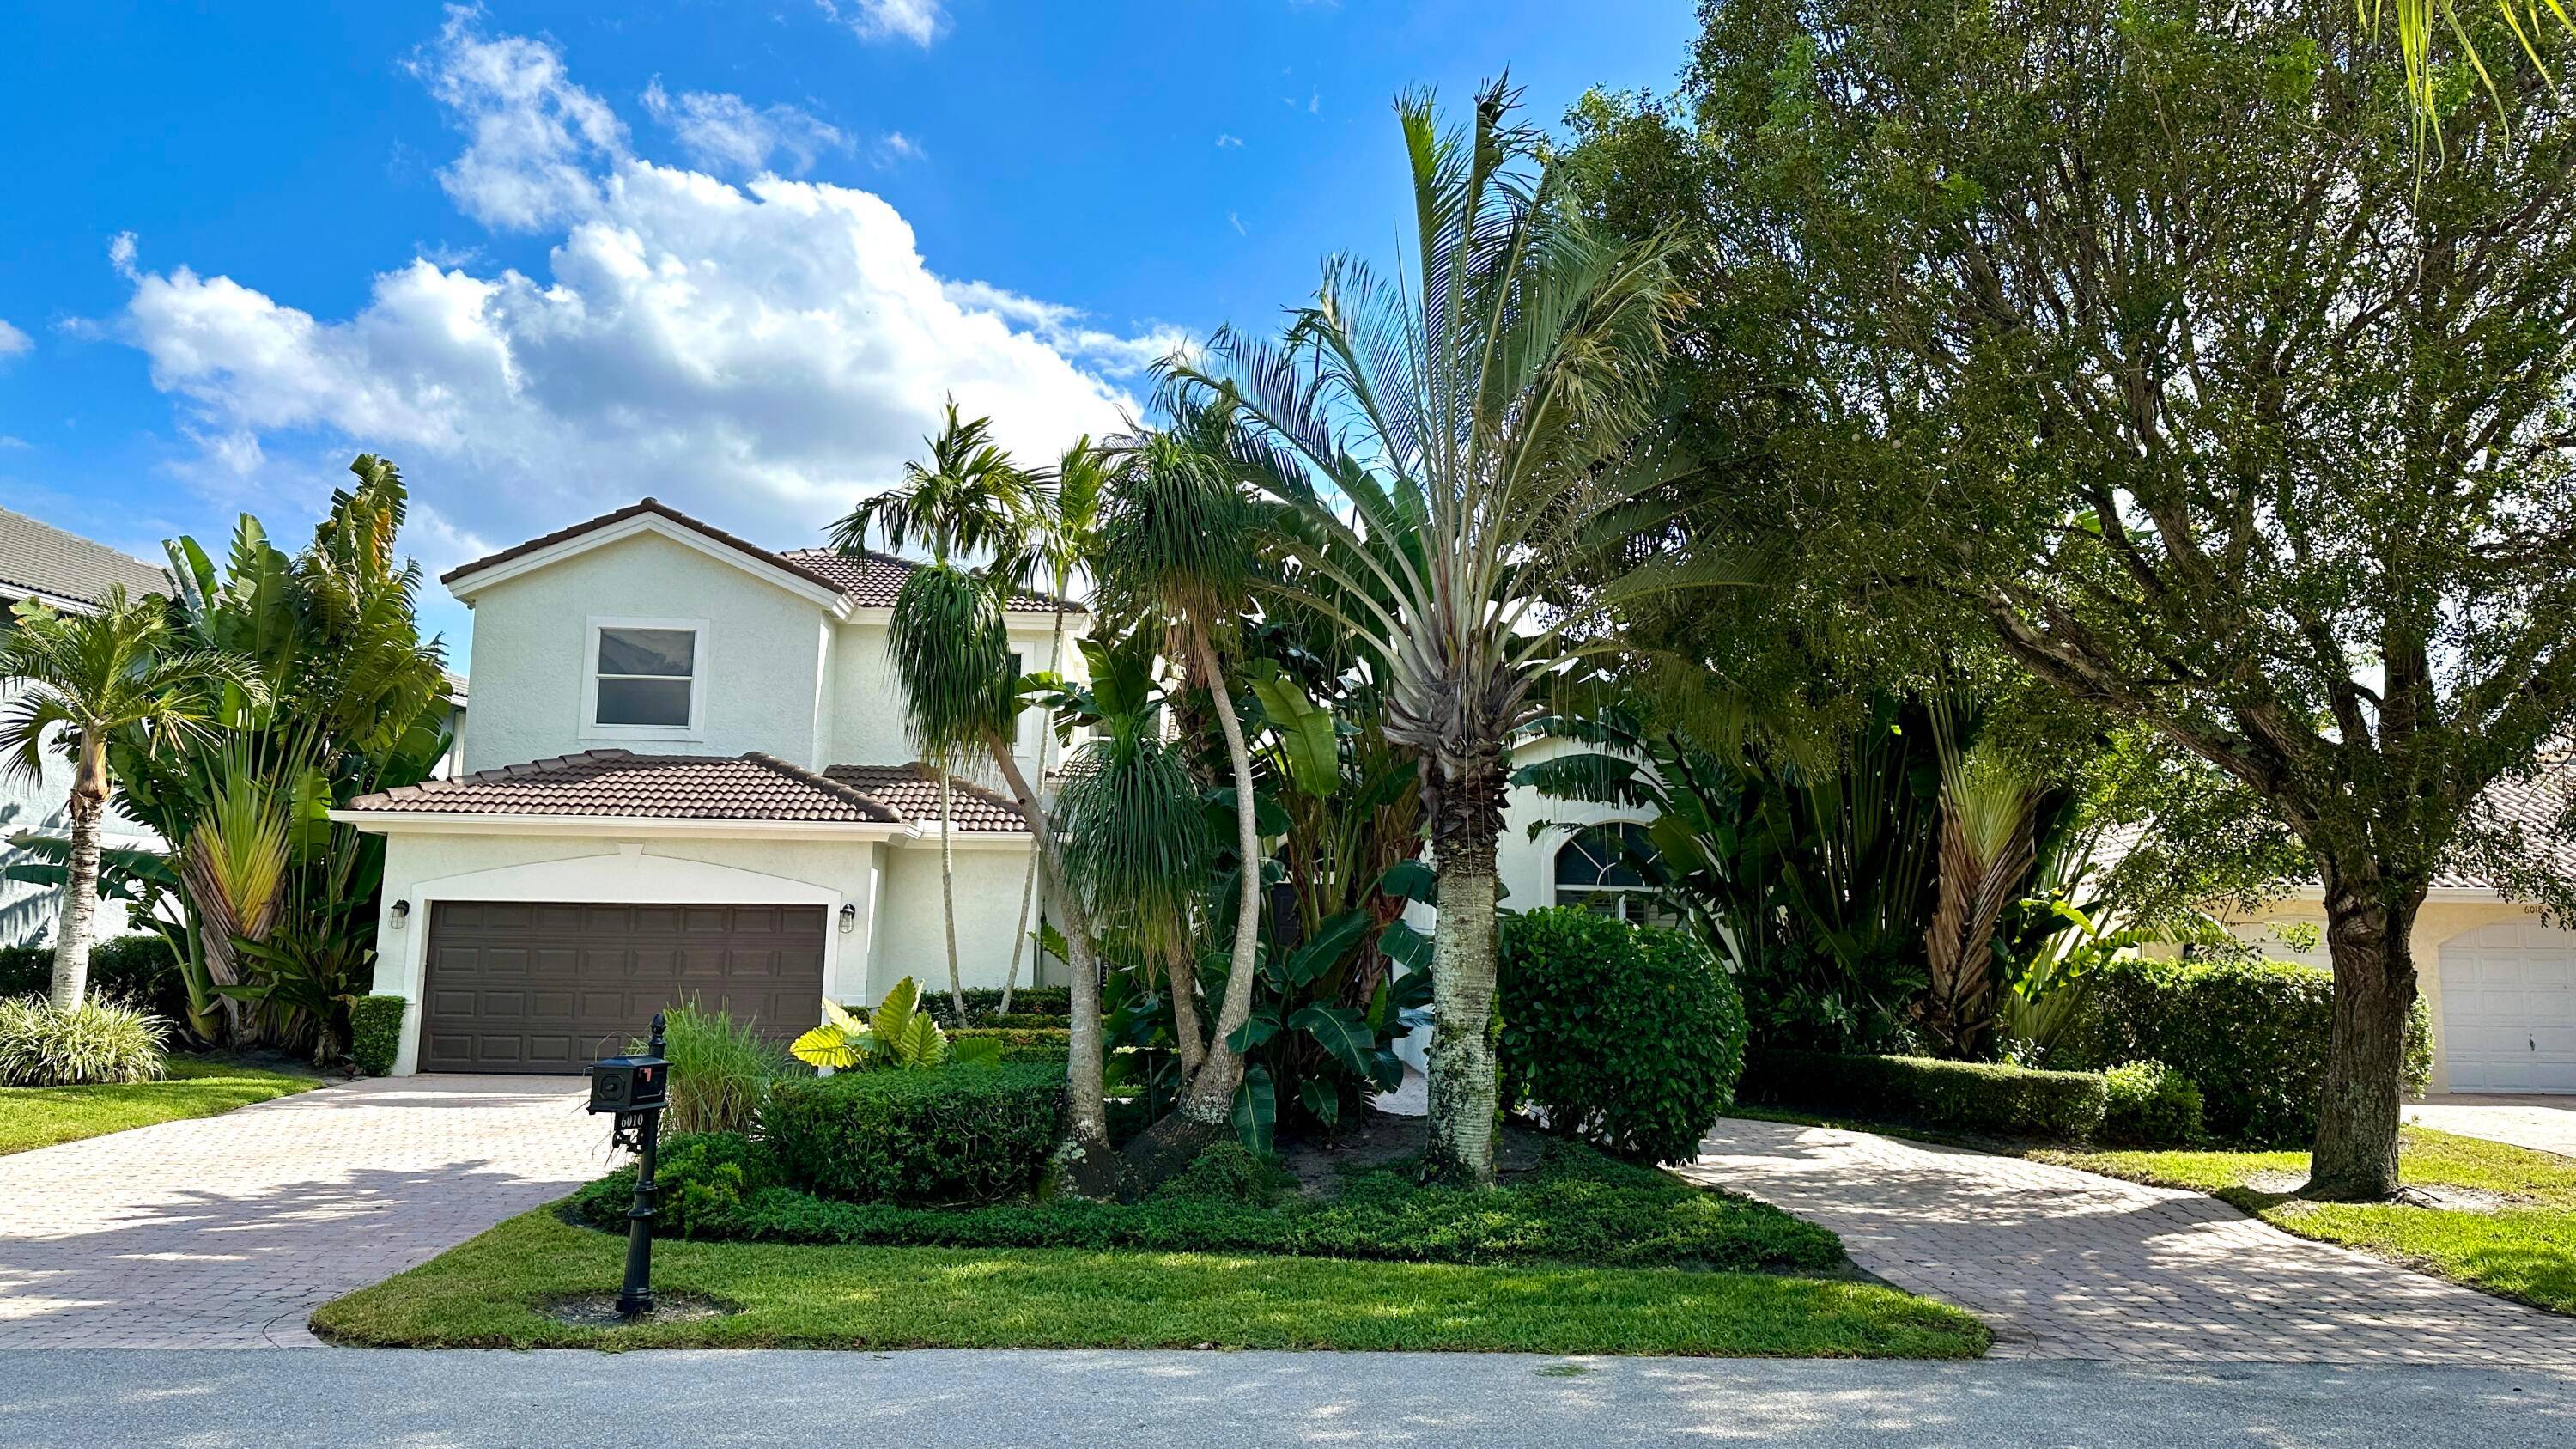 LOCATED IN BUENA VISTA AREA OF BOCA RATON SINGLE FAMILY POOL HOME WITH 2949 SQ FT UNDER AIR.